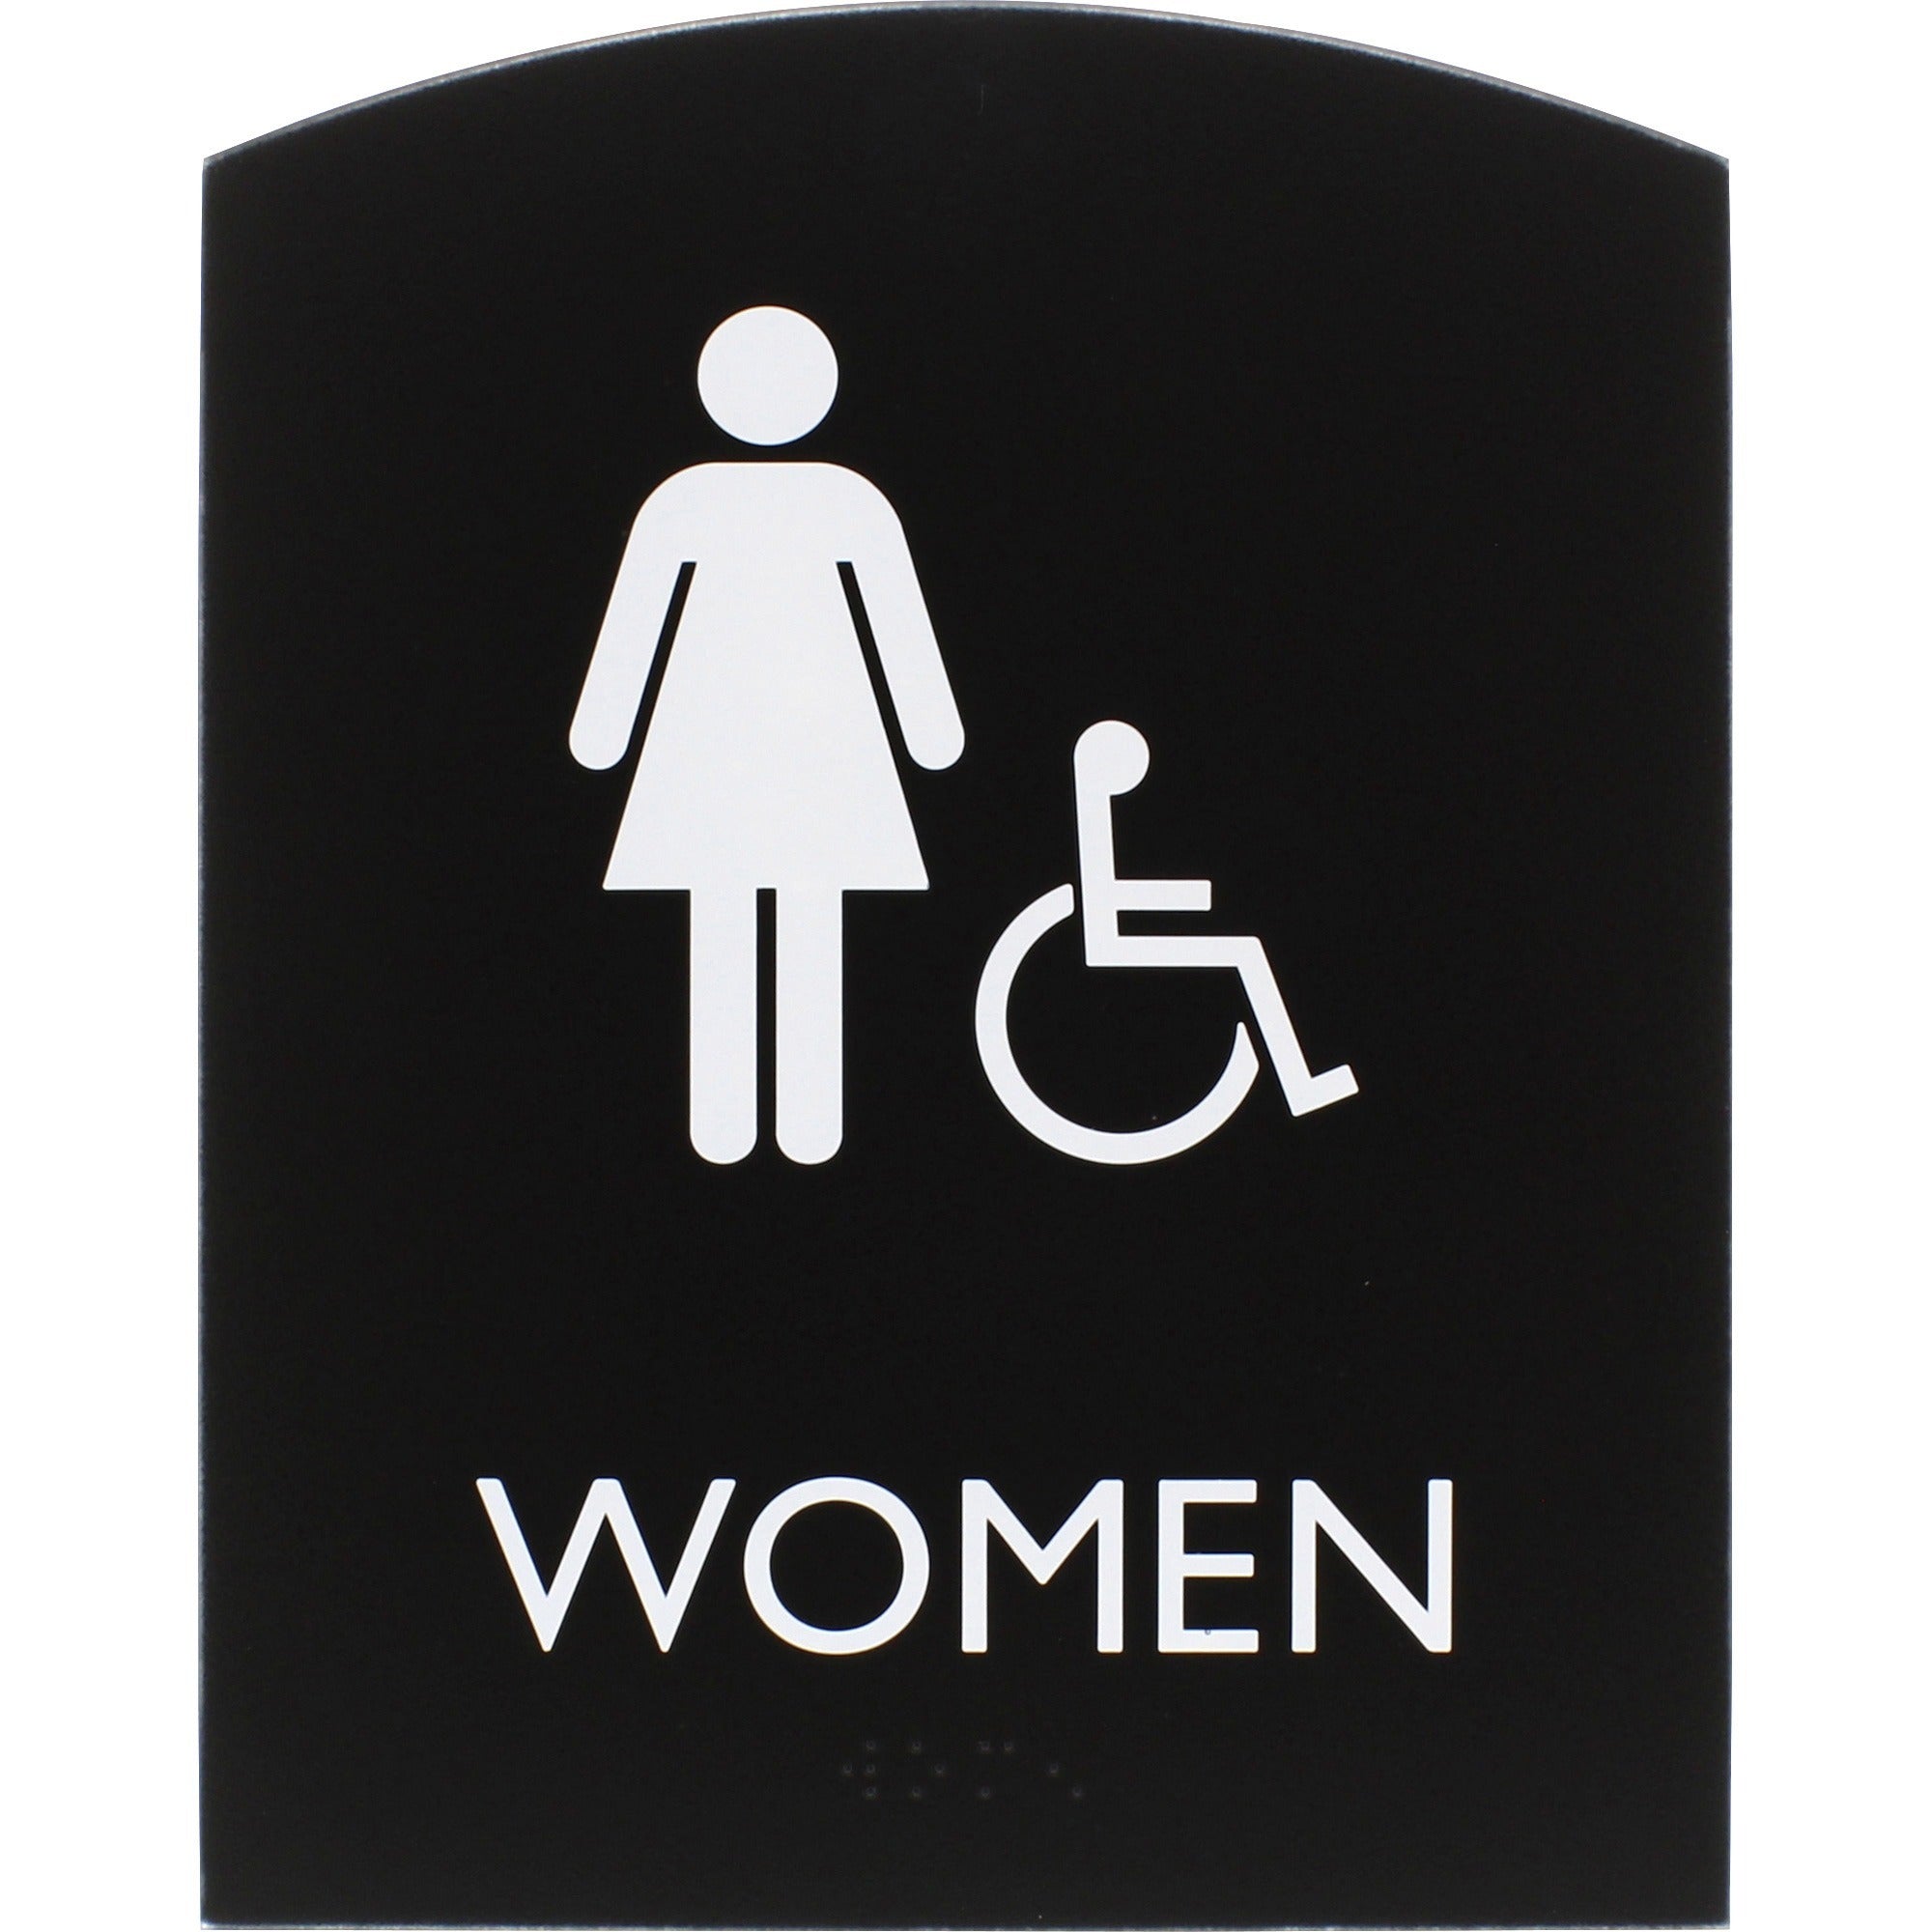 lorell-arched-womens-handicap-restroom-sign-1-each-women-print-message-68-width-x-85-height-rectangular-shape-surface-mountable-easy-readability-braille-plastic-black_llr02675 - 1